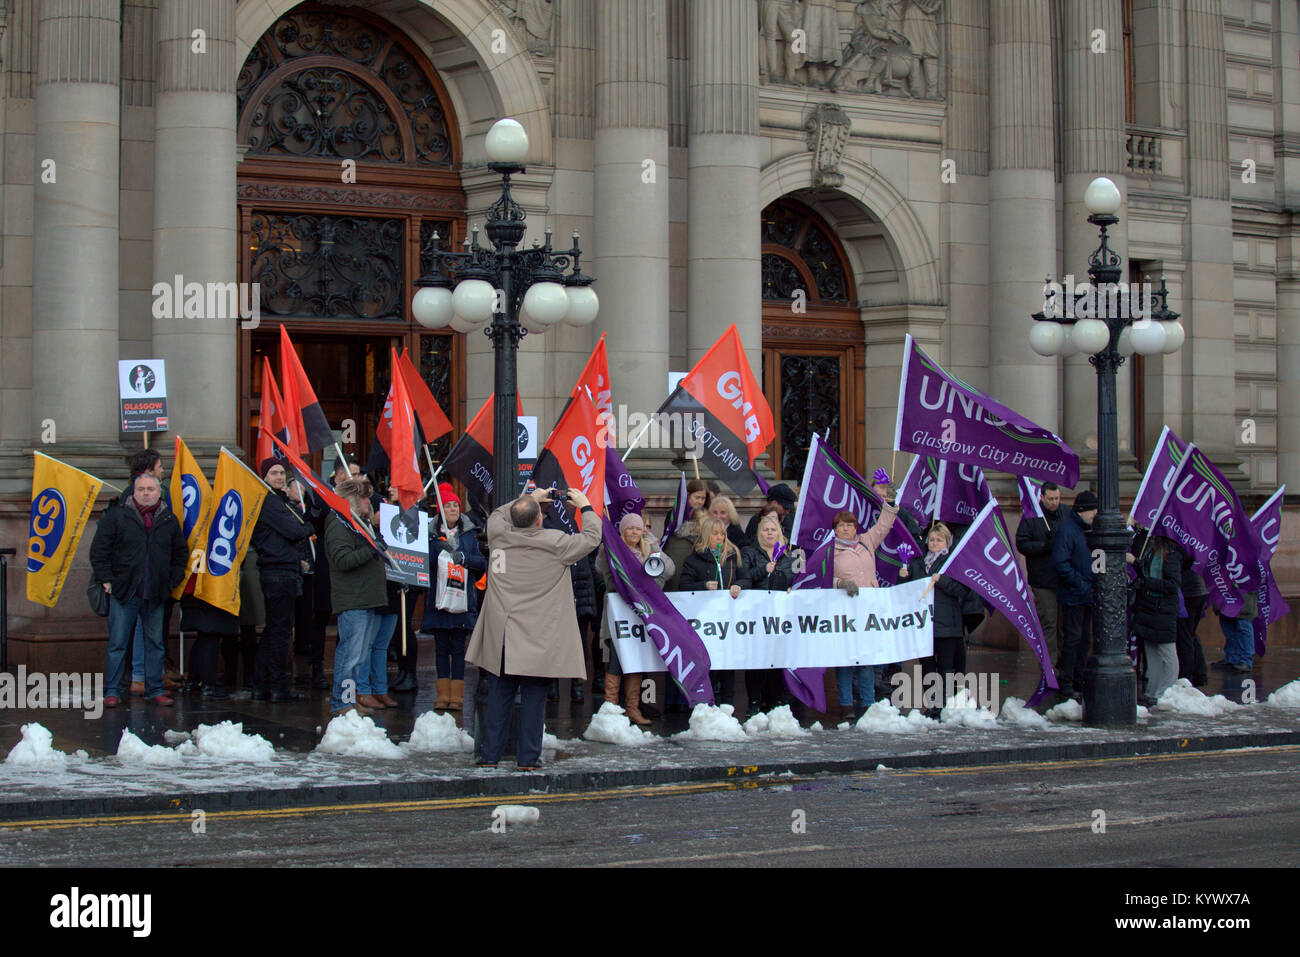 Glasgow, Scotland, UK 17th January. Council workers gather in George Square today to protest  court battle with unions and staff over equal pay..The protest was led by union GMB and Unison. Credit: gerard ferry/Alamy Live News Stock Photo